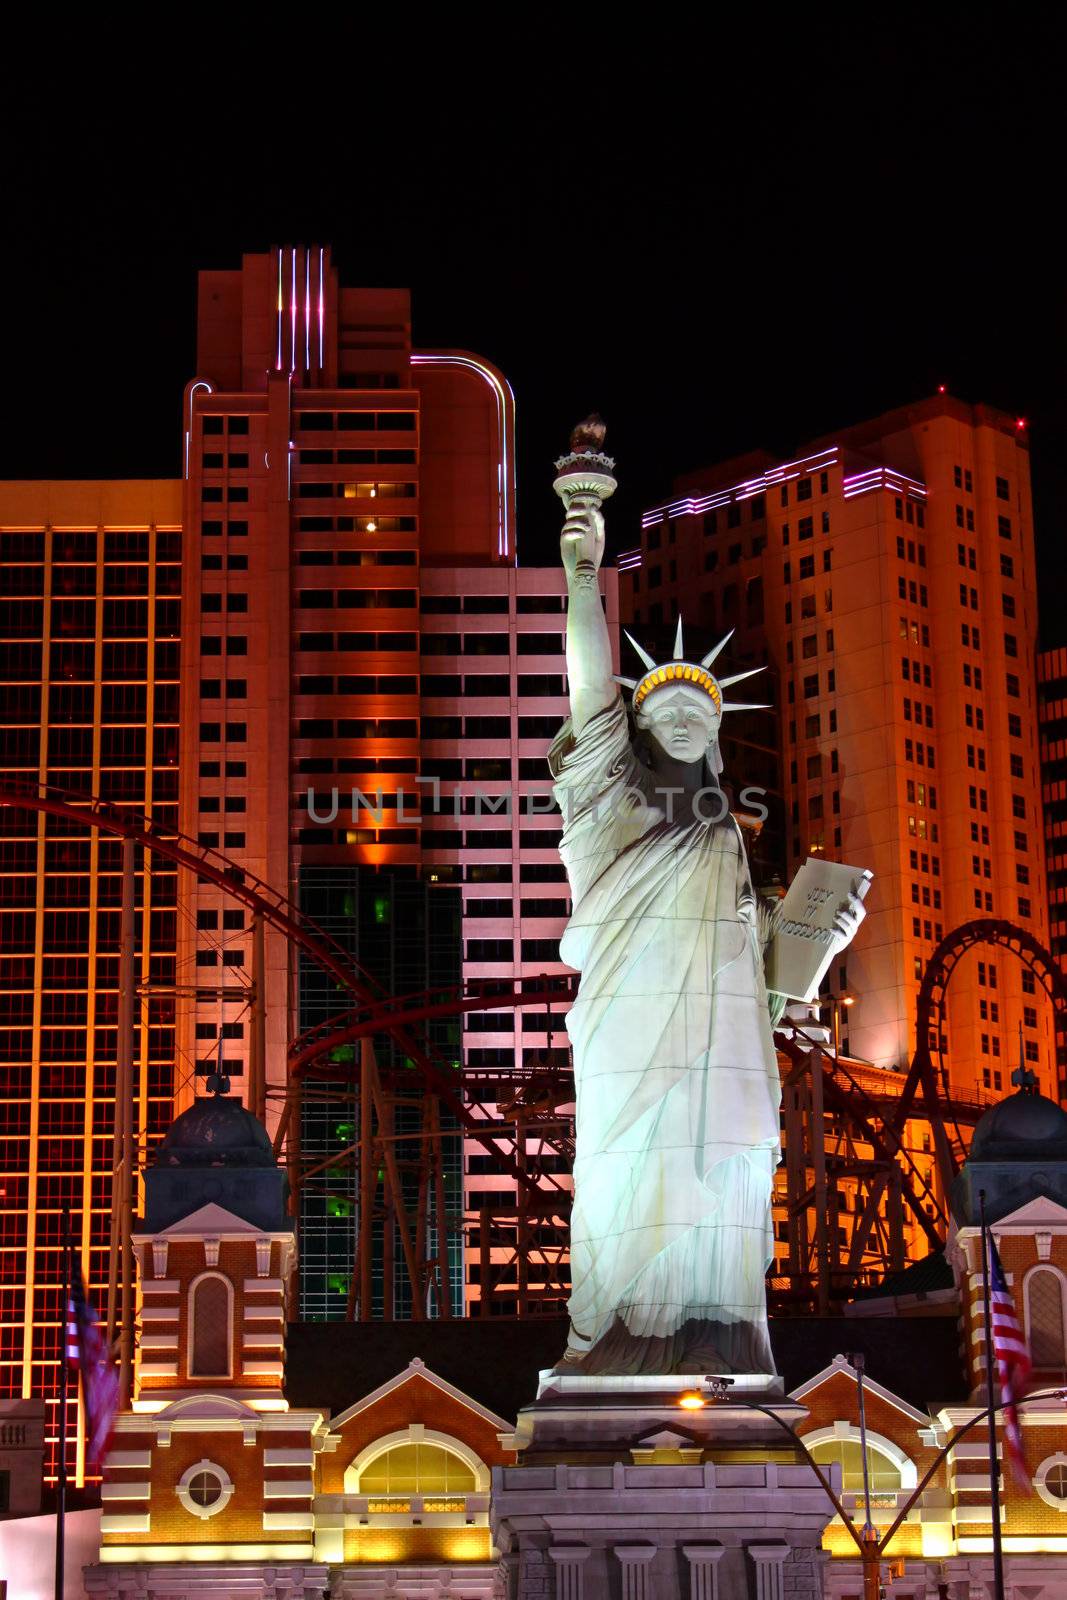 Las Vegas, USA - October 29, 2011: The New York New York Hotel and Casino in Las Vegas on Tropicana Avenue and Las Vegas Boulevard features a replica of the Statue of Liberty.  The architecture of the resort and casino is made to look like the skyline of New York.